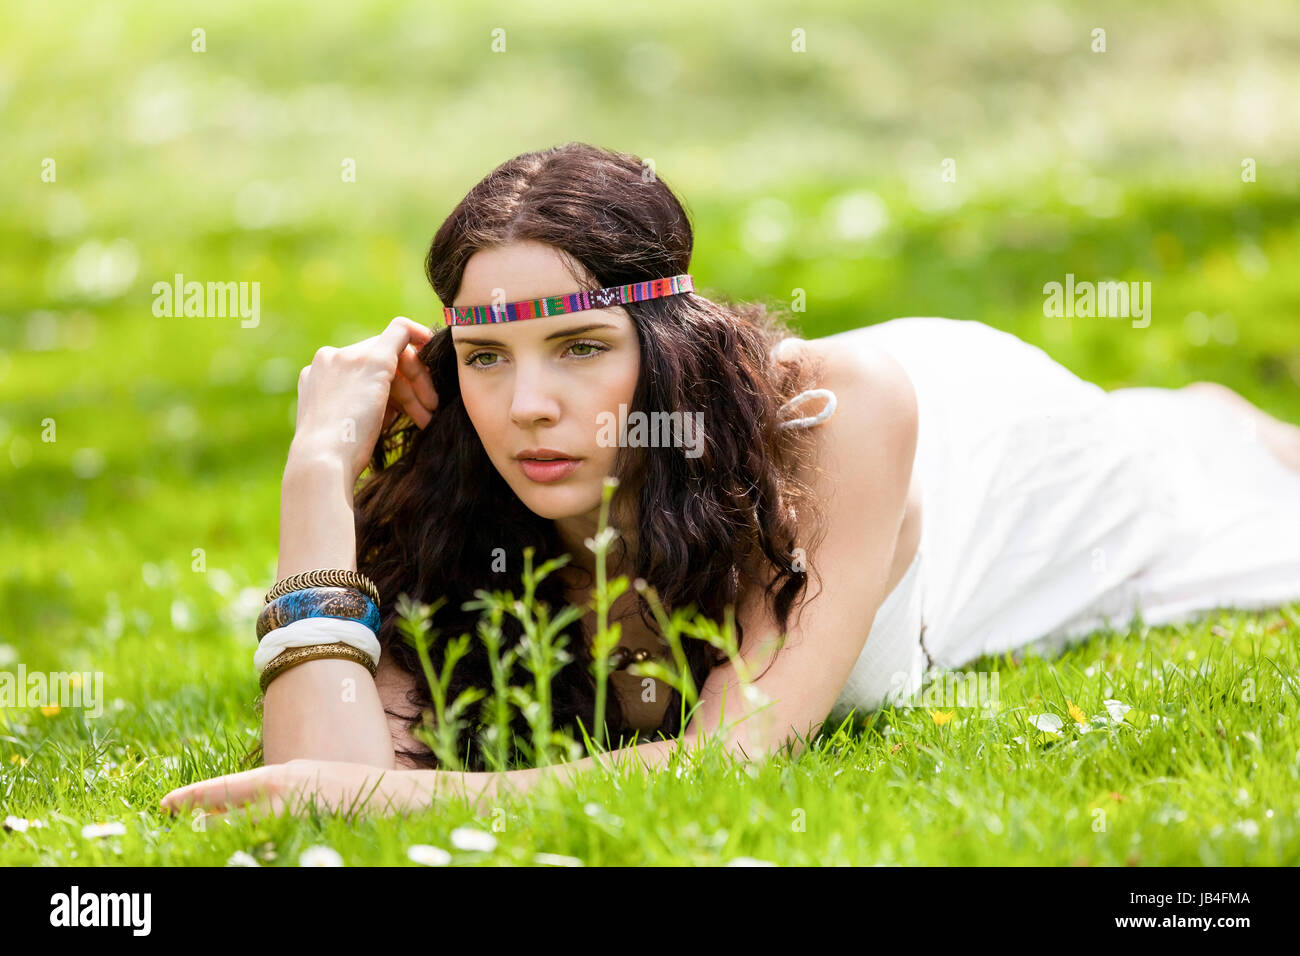 Stirnband High Resolution Stock Photography and Images - Alamy